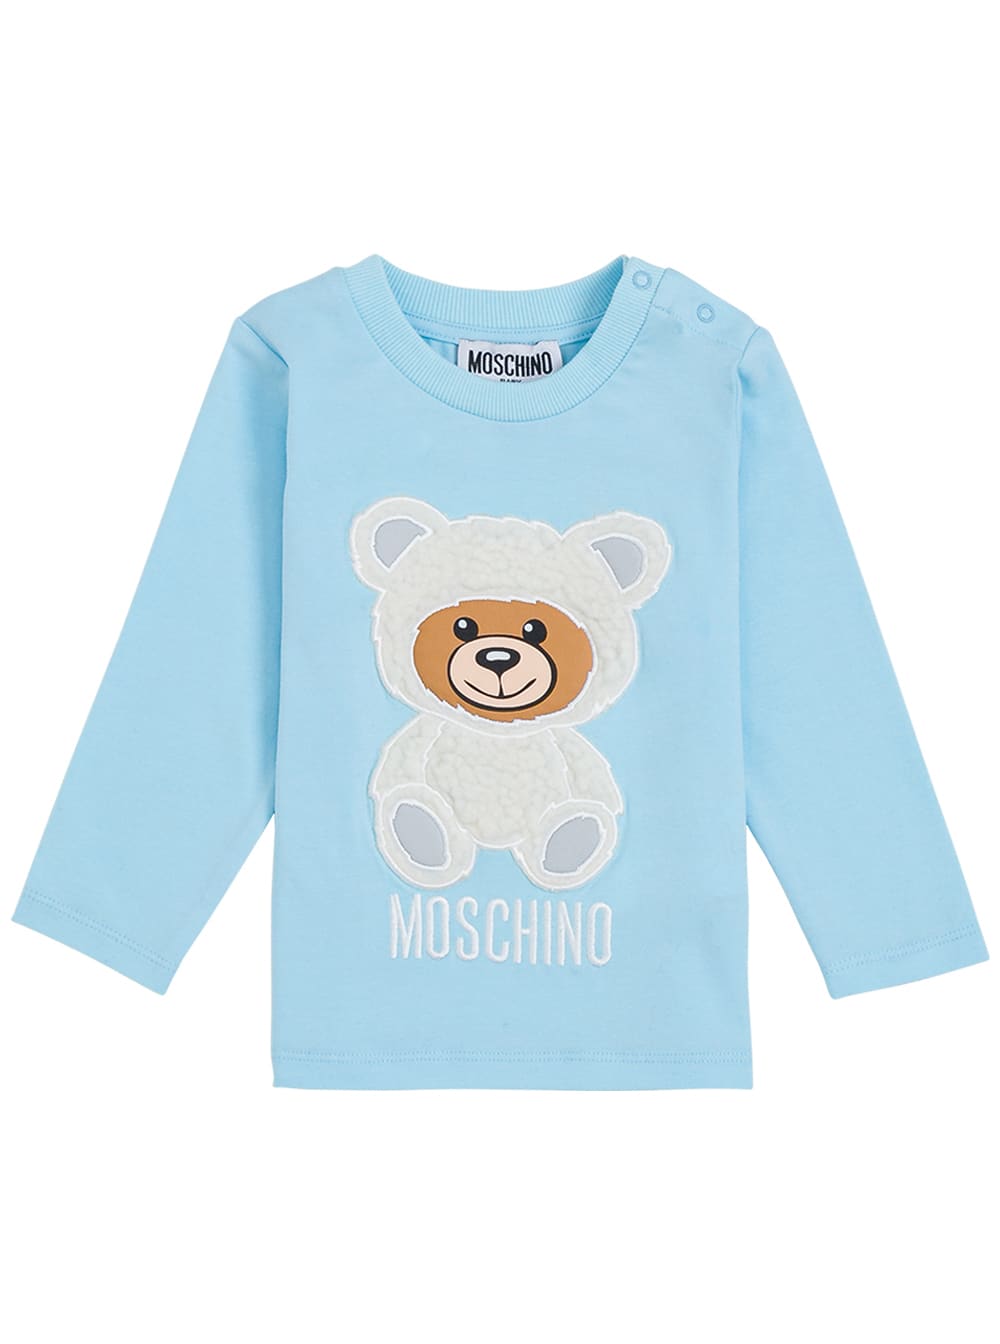 Moschino Long-sleeved T- Shirt In Light Blue Cotton With Teddy Bear